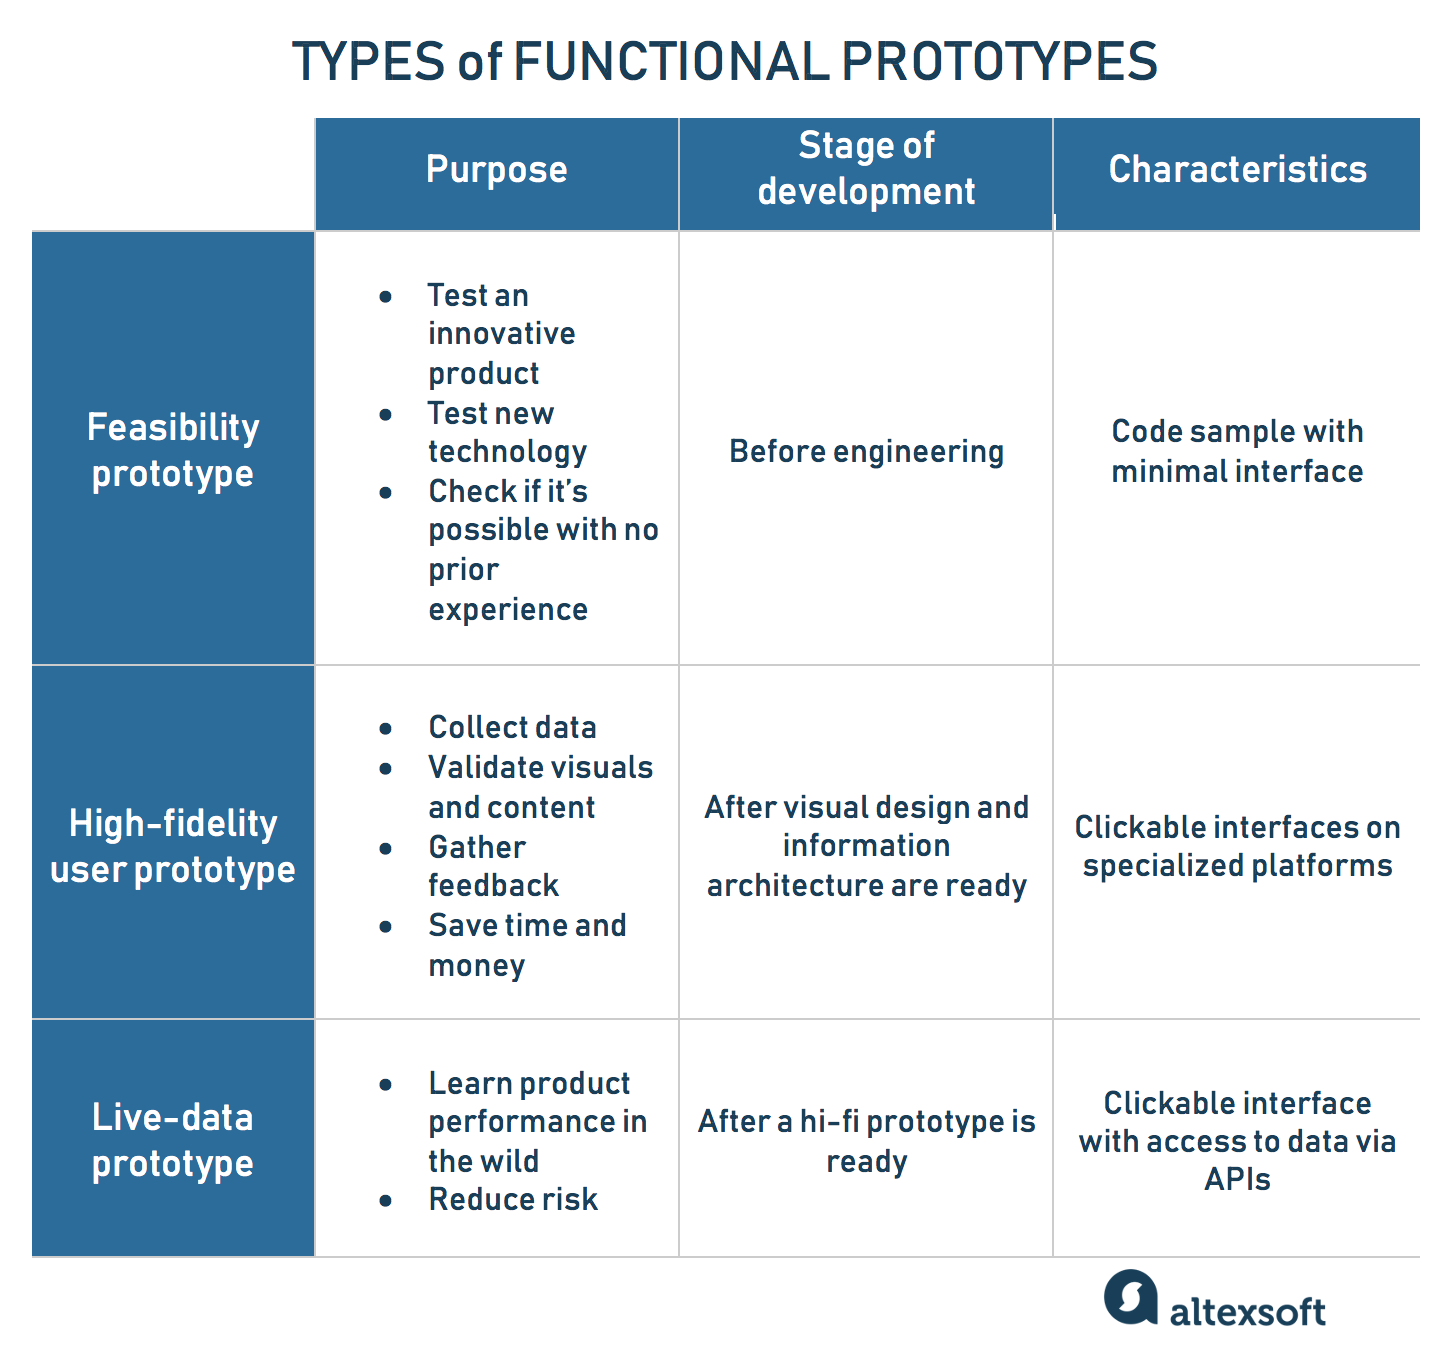 Comparing functional prototypes